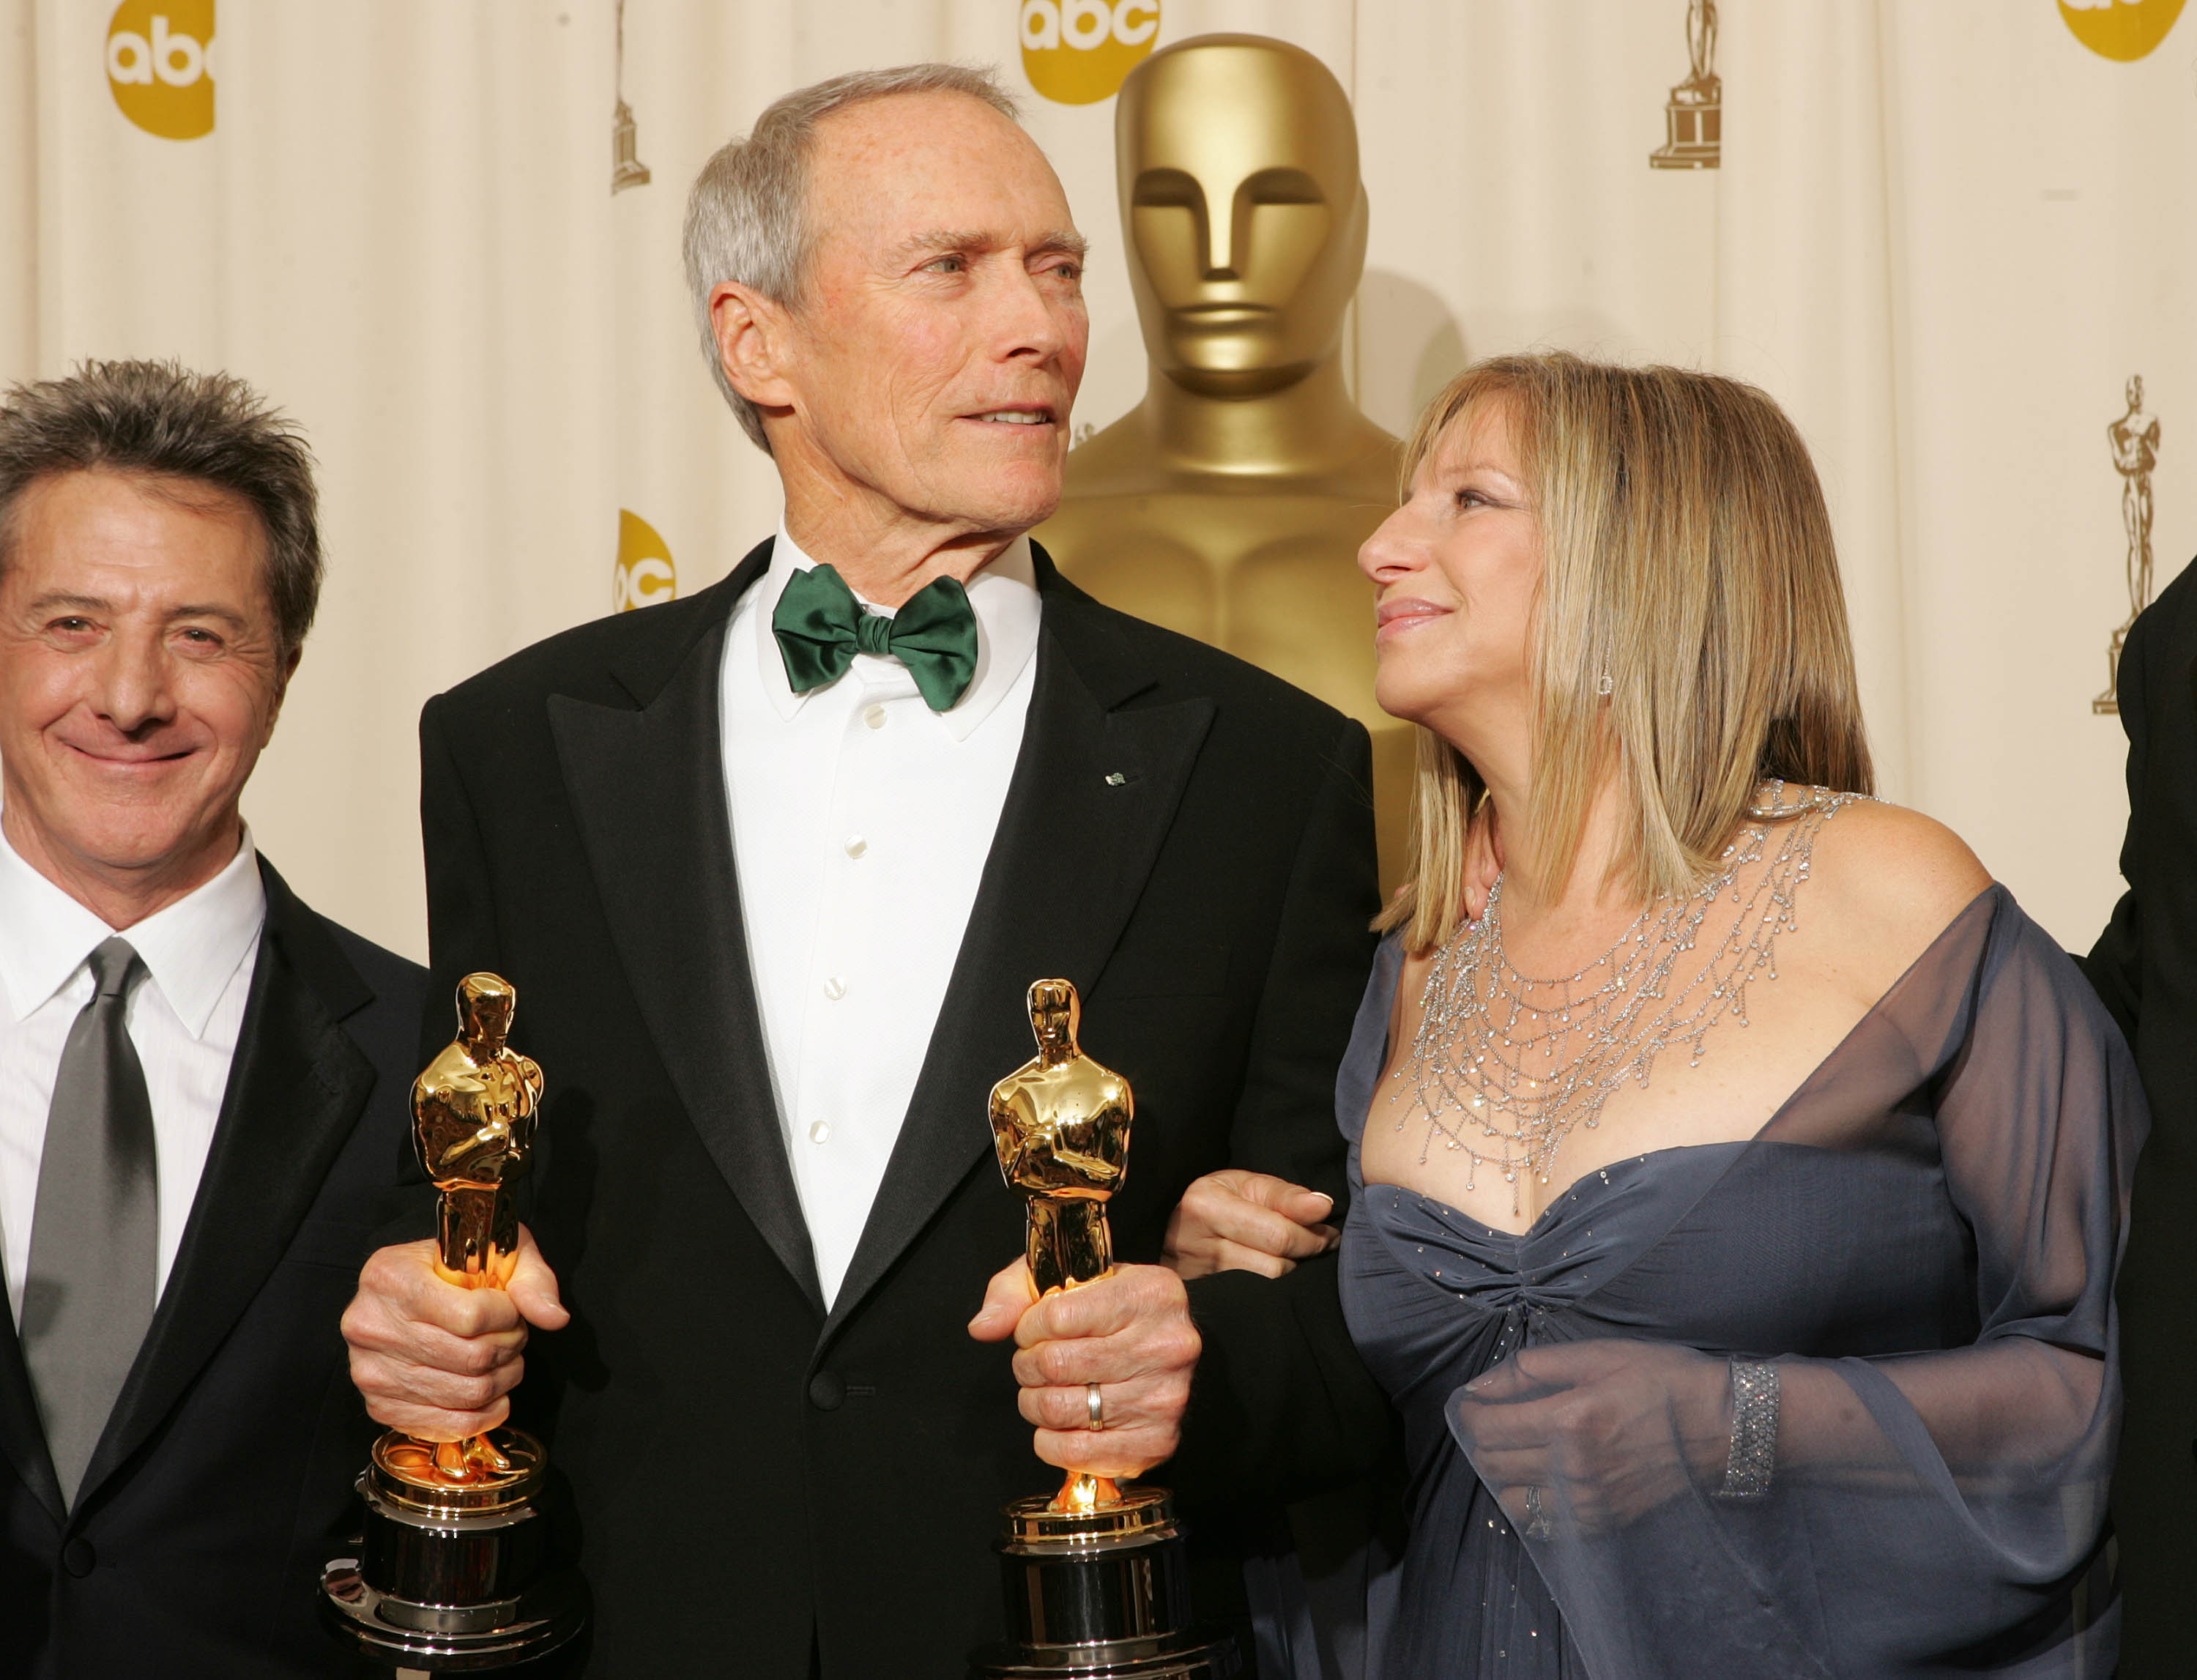 Dustin Hoffman, Producer Clint Eastwood and Presenter Barbara Streisand pose with the award for Best Movie for "Million Dollar Baby" backstage during the 77th Annual Academy Awards on February 27, 2005 at the Kodak Theater in Hollywood,  Forrás: Frank Micelotta/Getty Images